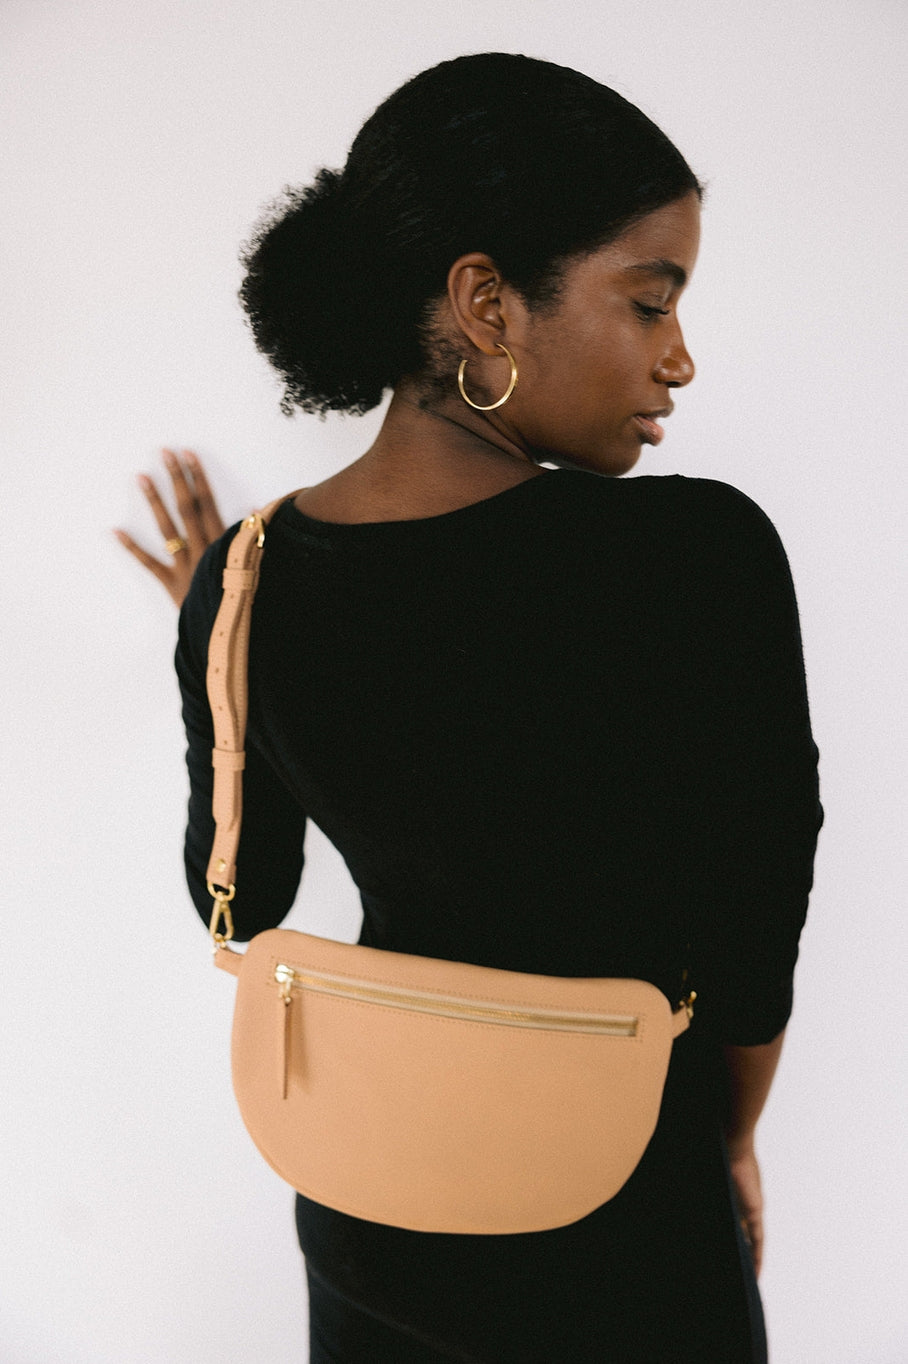 The best-selling Sling Bag is now available in a bigger size. Still sleek, lightweight, and chic, now you'll be able to add that *one* extra thing. Your large wallet, glasses case, or even a small book will fit inside the Big Sling. Fair trade and adjustable leather sling bag/fanny pack.